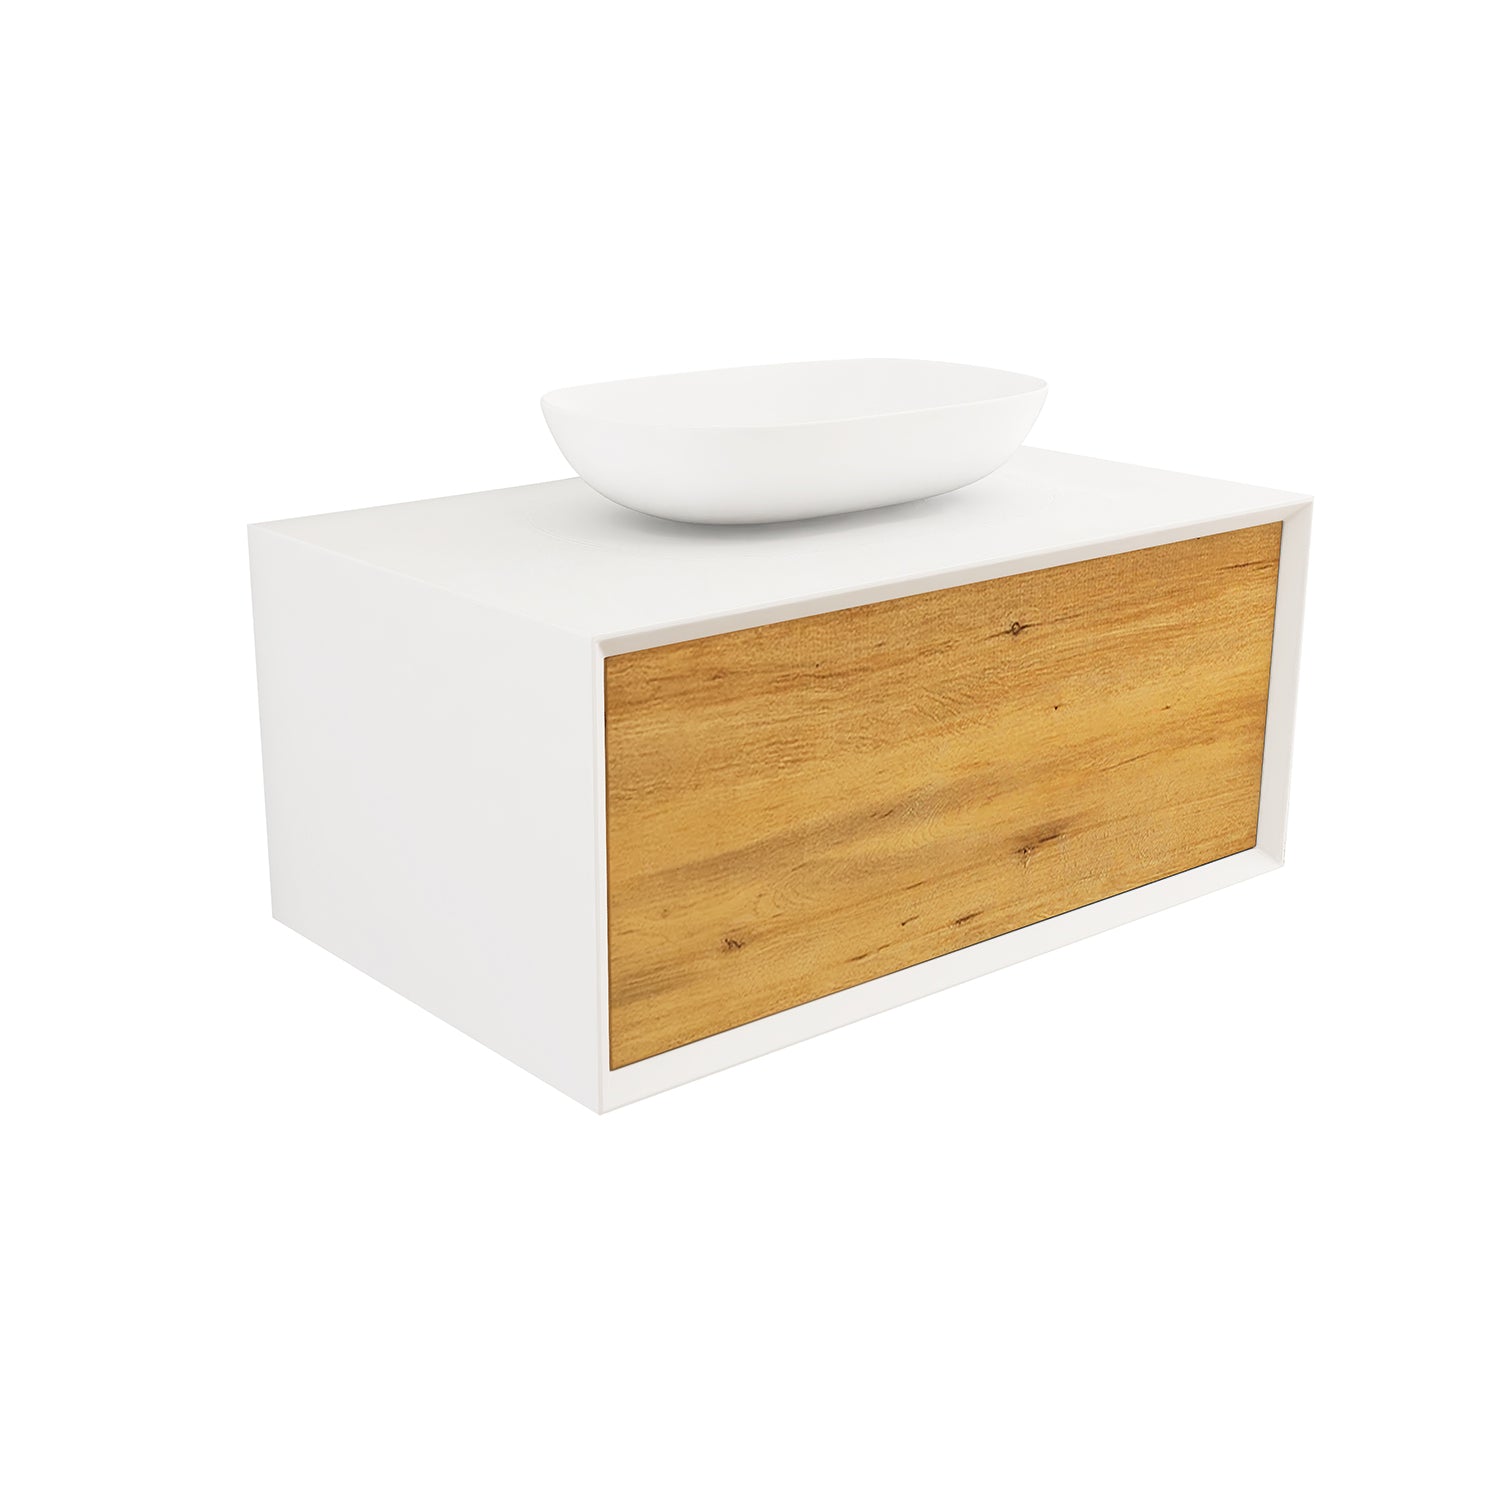 Staykiwi High-End Floating Bathroom Vanity with Solid Surface Top and Sink